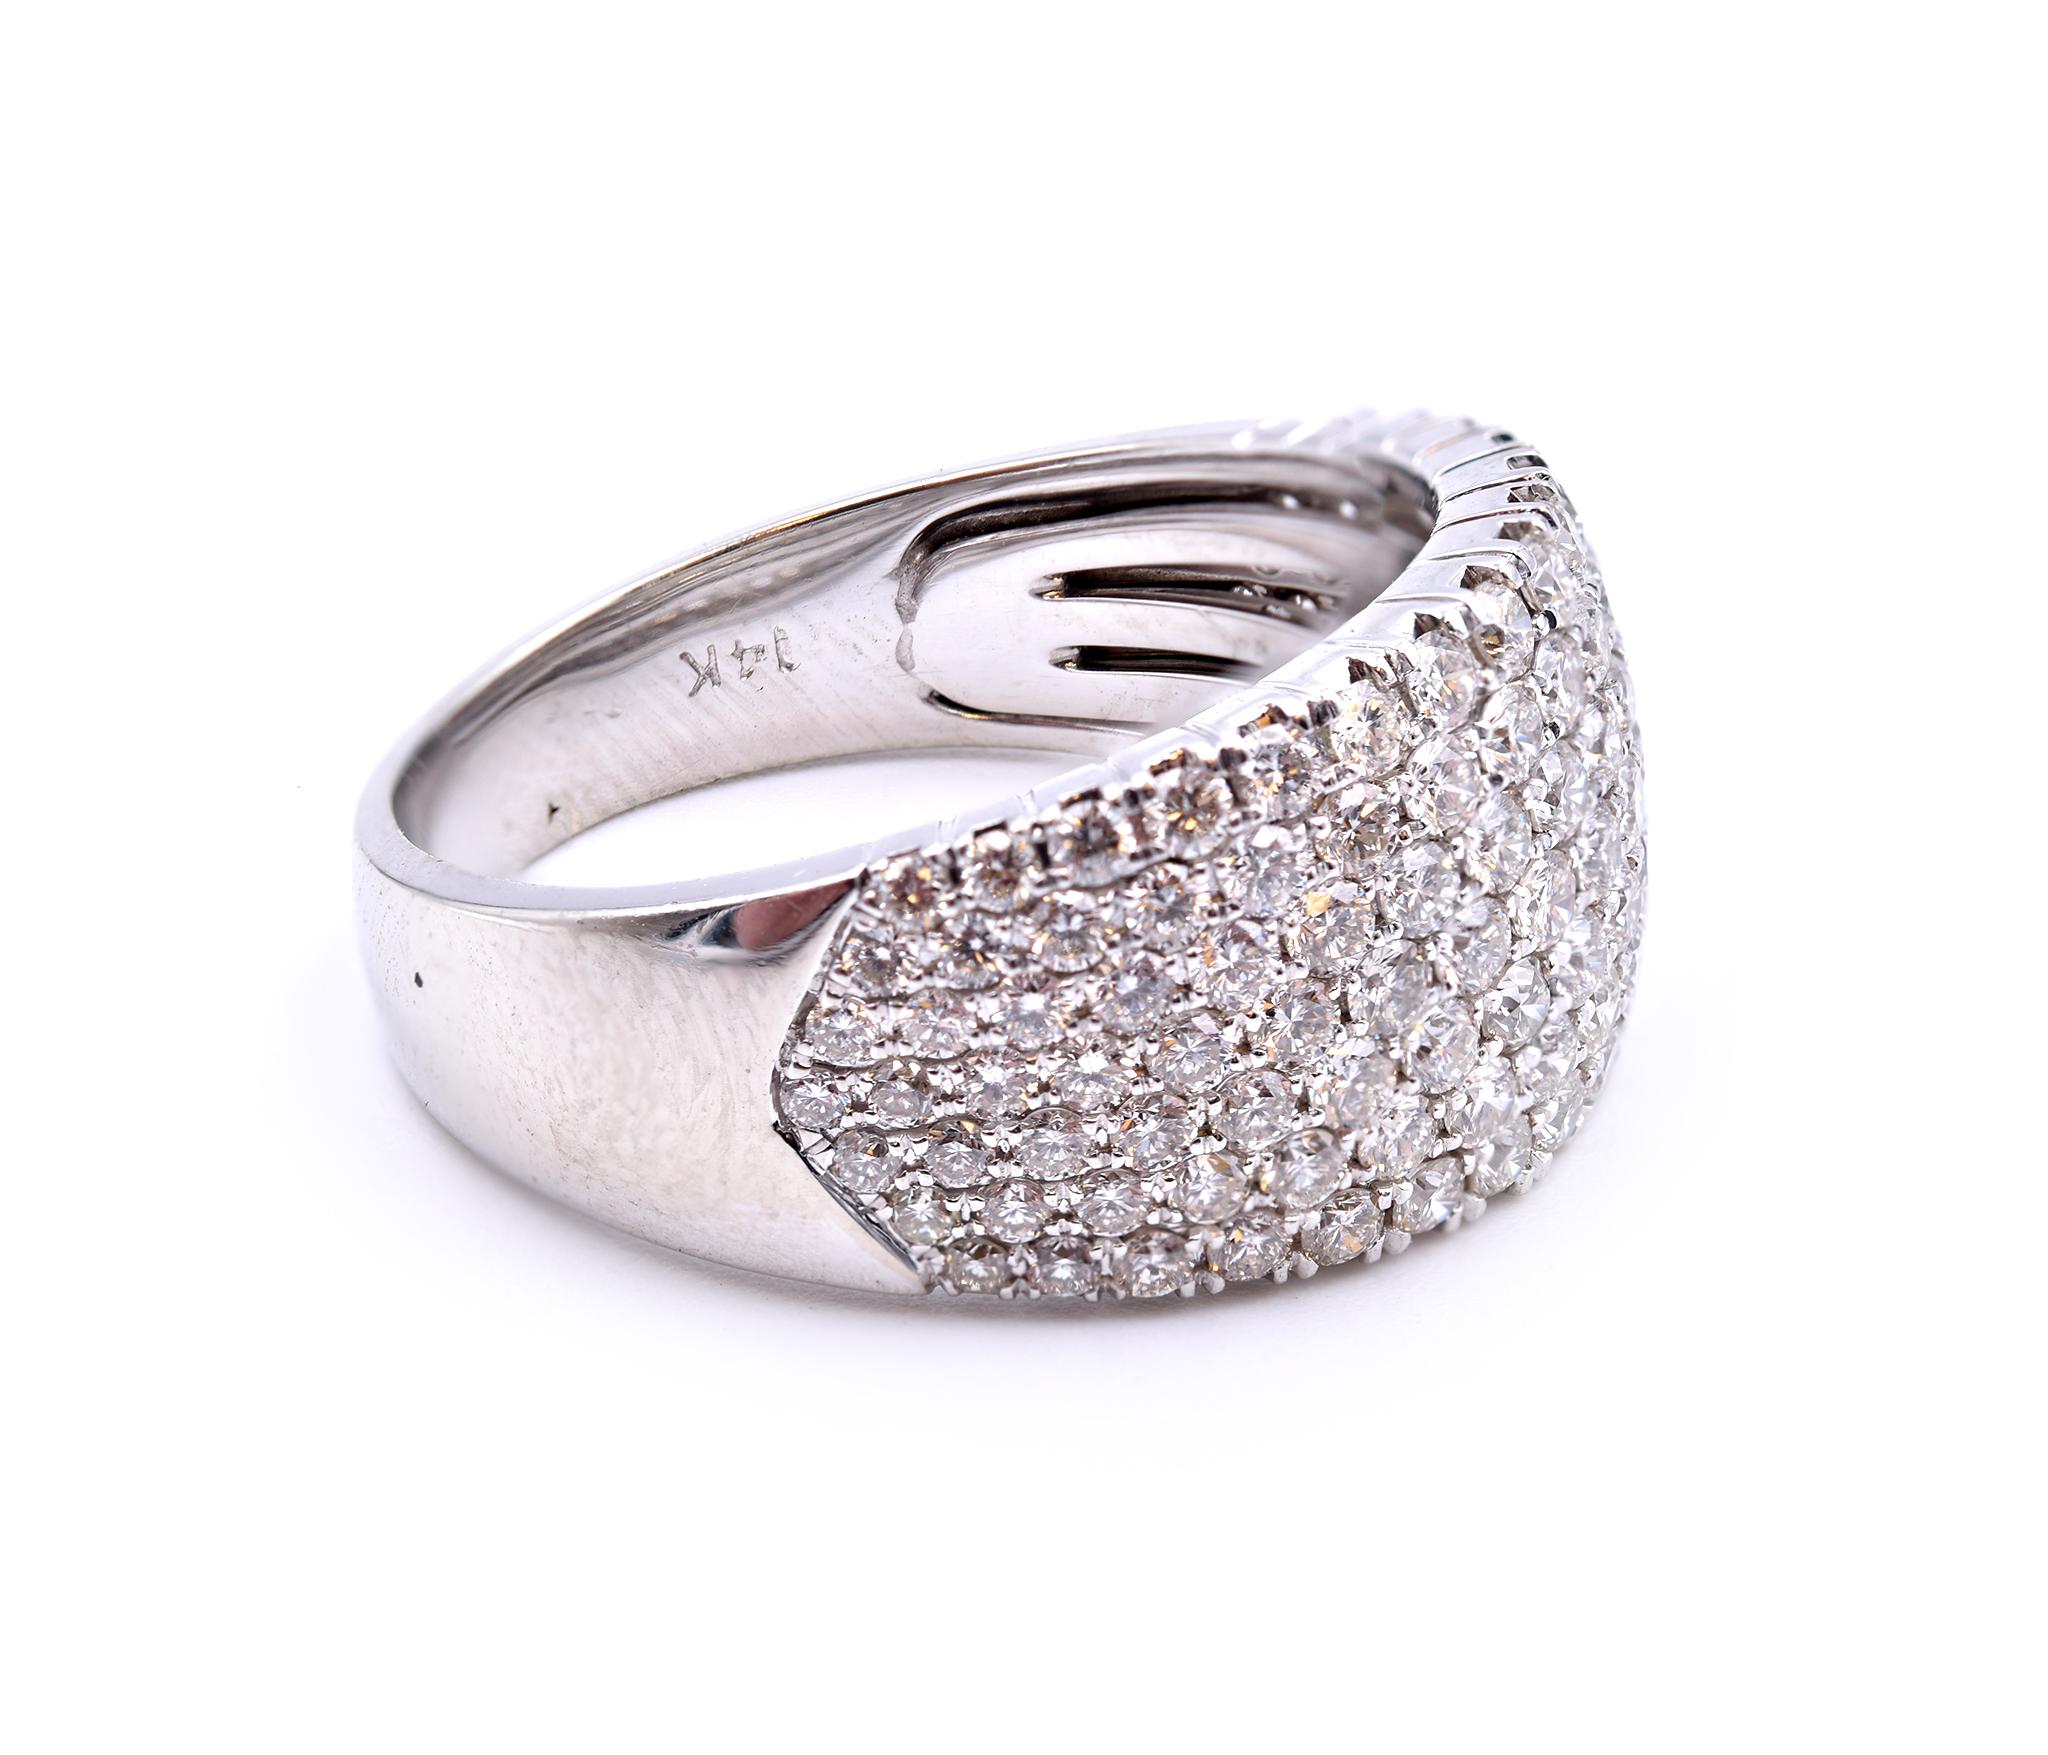 Designer: custom design
Material: 14k white gold
Diamonds: 121 brilliant cuts = 2.00cttw
Color: G
Clarity: VS
Ring size: 9 (please allow two additional shipping days for sizing requests)
Dimensions: ring measures 11.60mm
Weight: 10.58 grams 
